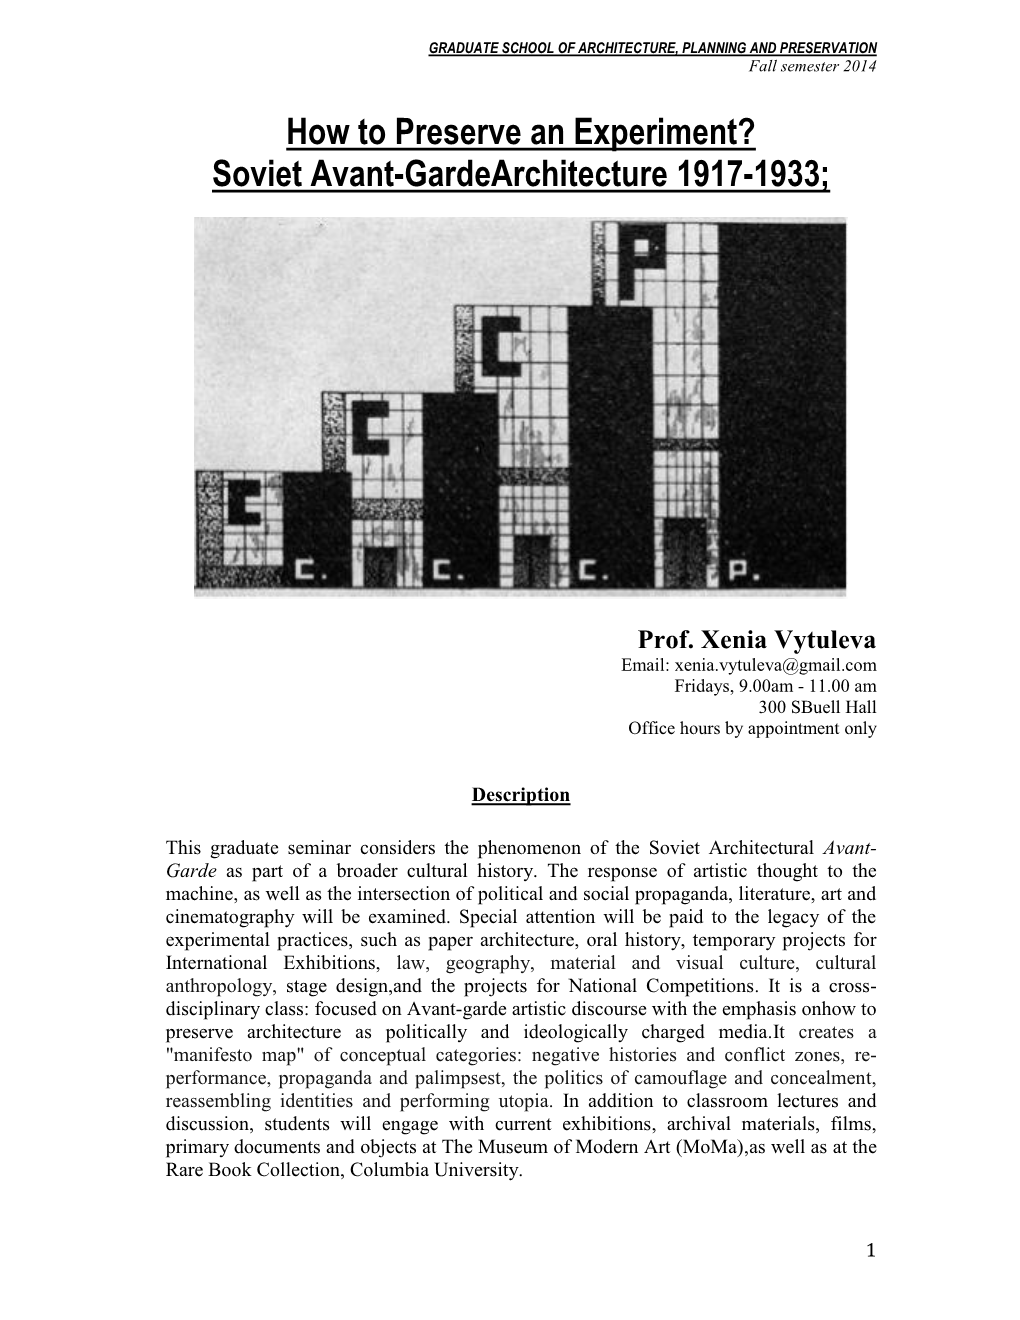 How to Preserve an Experiment? Soviet Avant-Gardearchitecture 1917-1933;